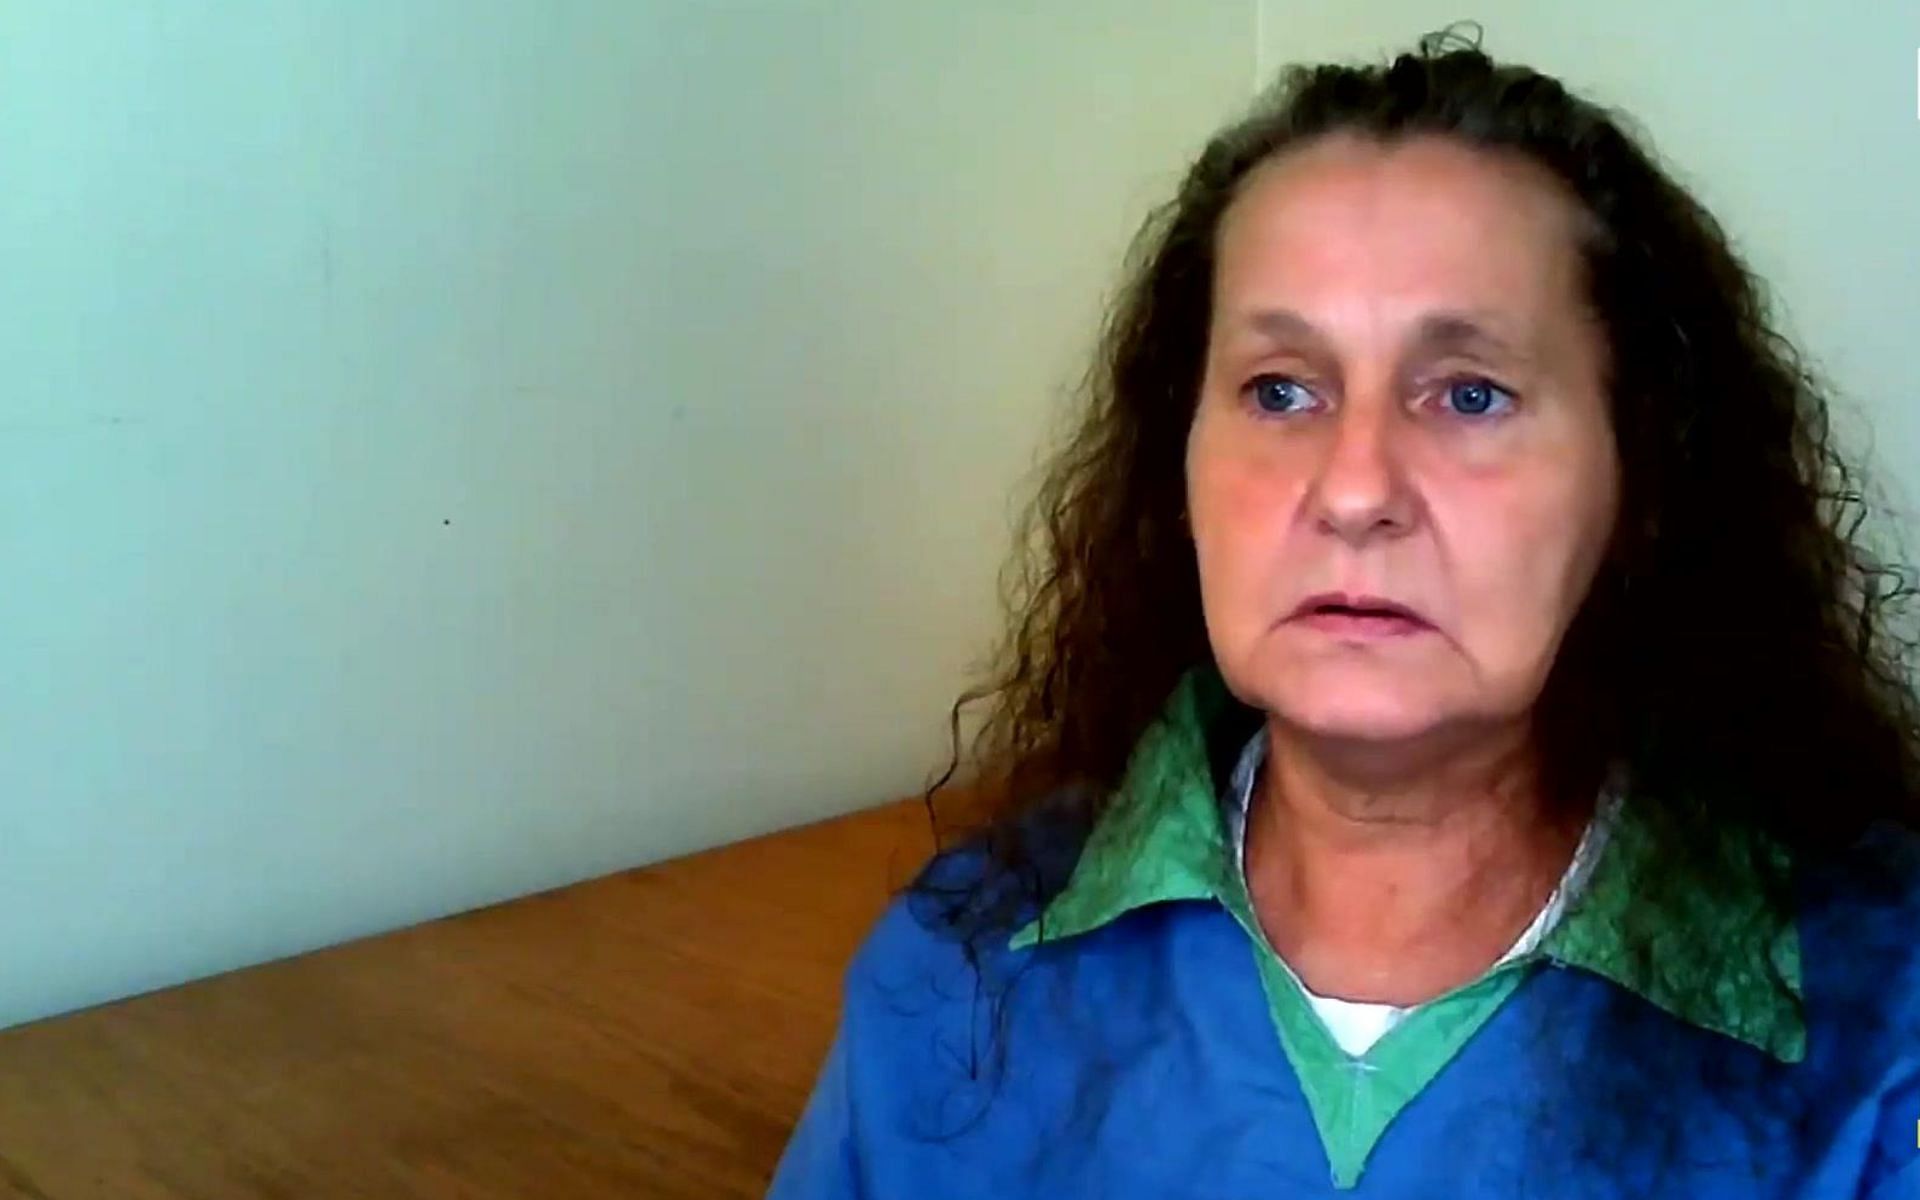 Teresa Kotomski was brought in for a reinterview in 2012 (Image via Oxygen)